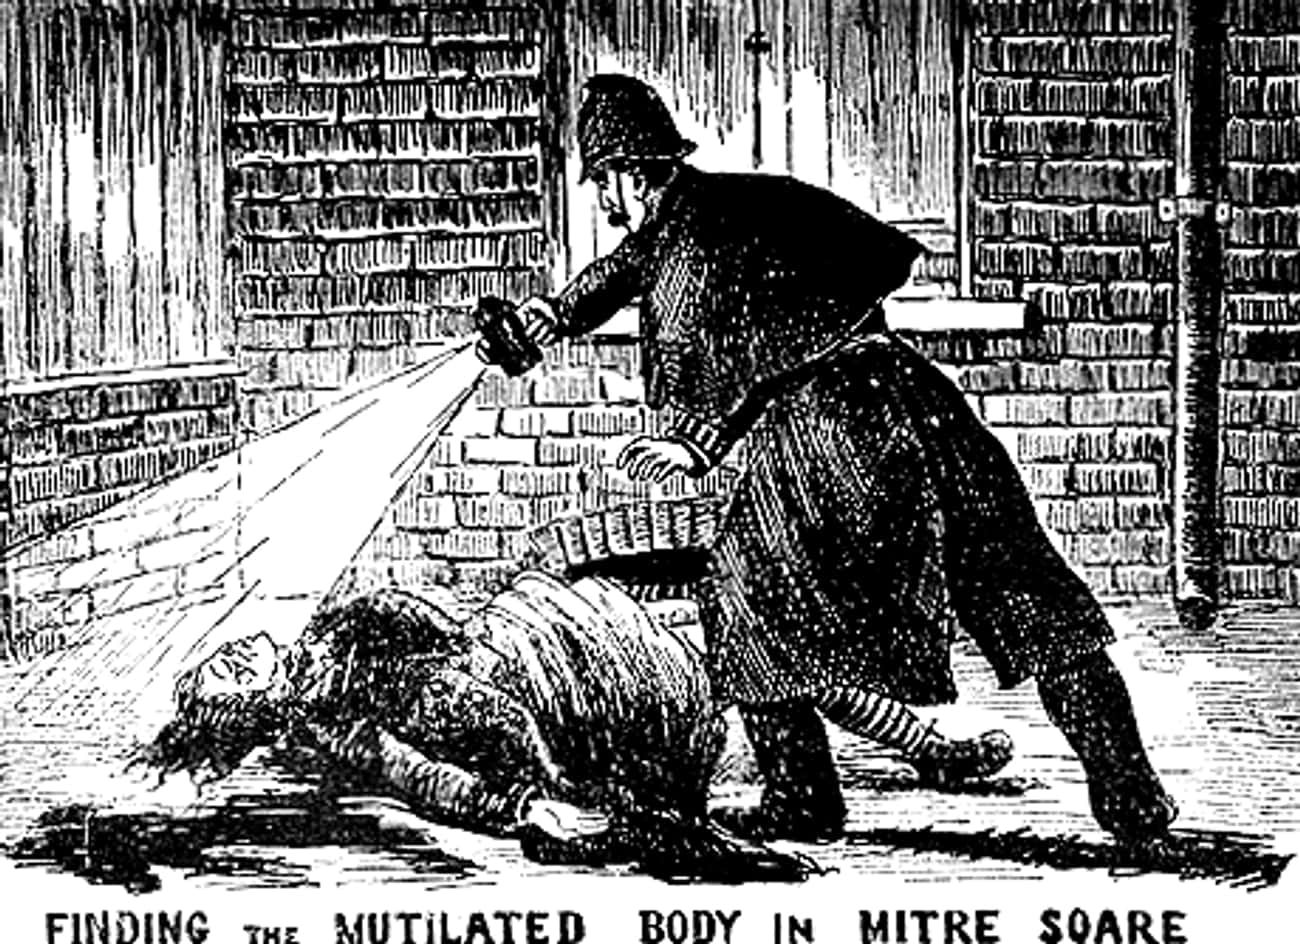 Walter Sickert Is One Of Over 100 People Suspected To Be Jack The Ripper